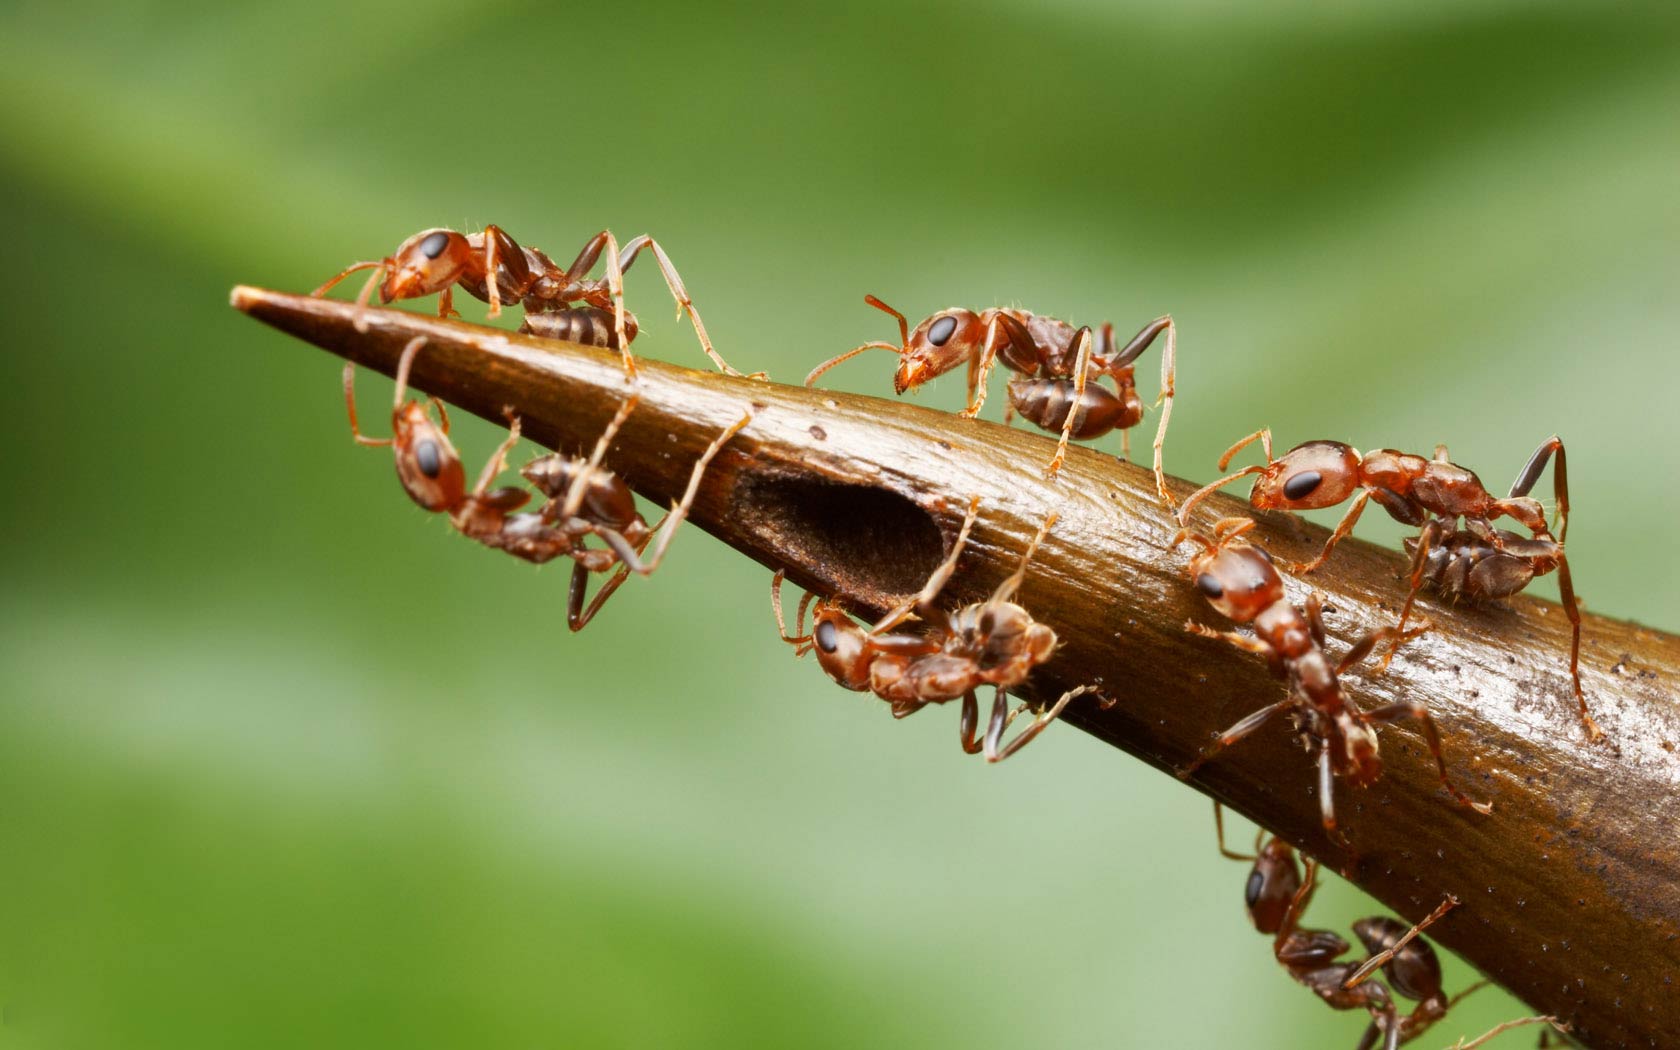 free Ant wallpaper wallpapers download